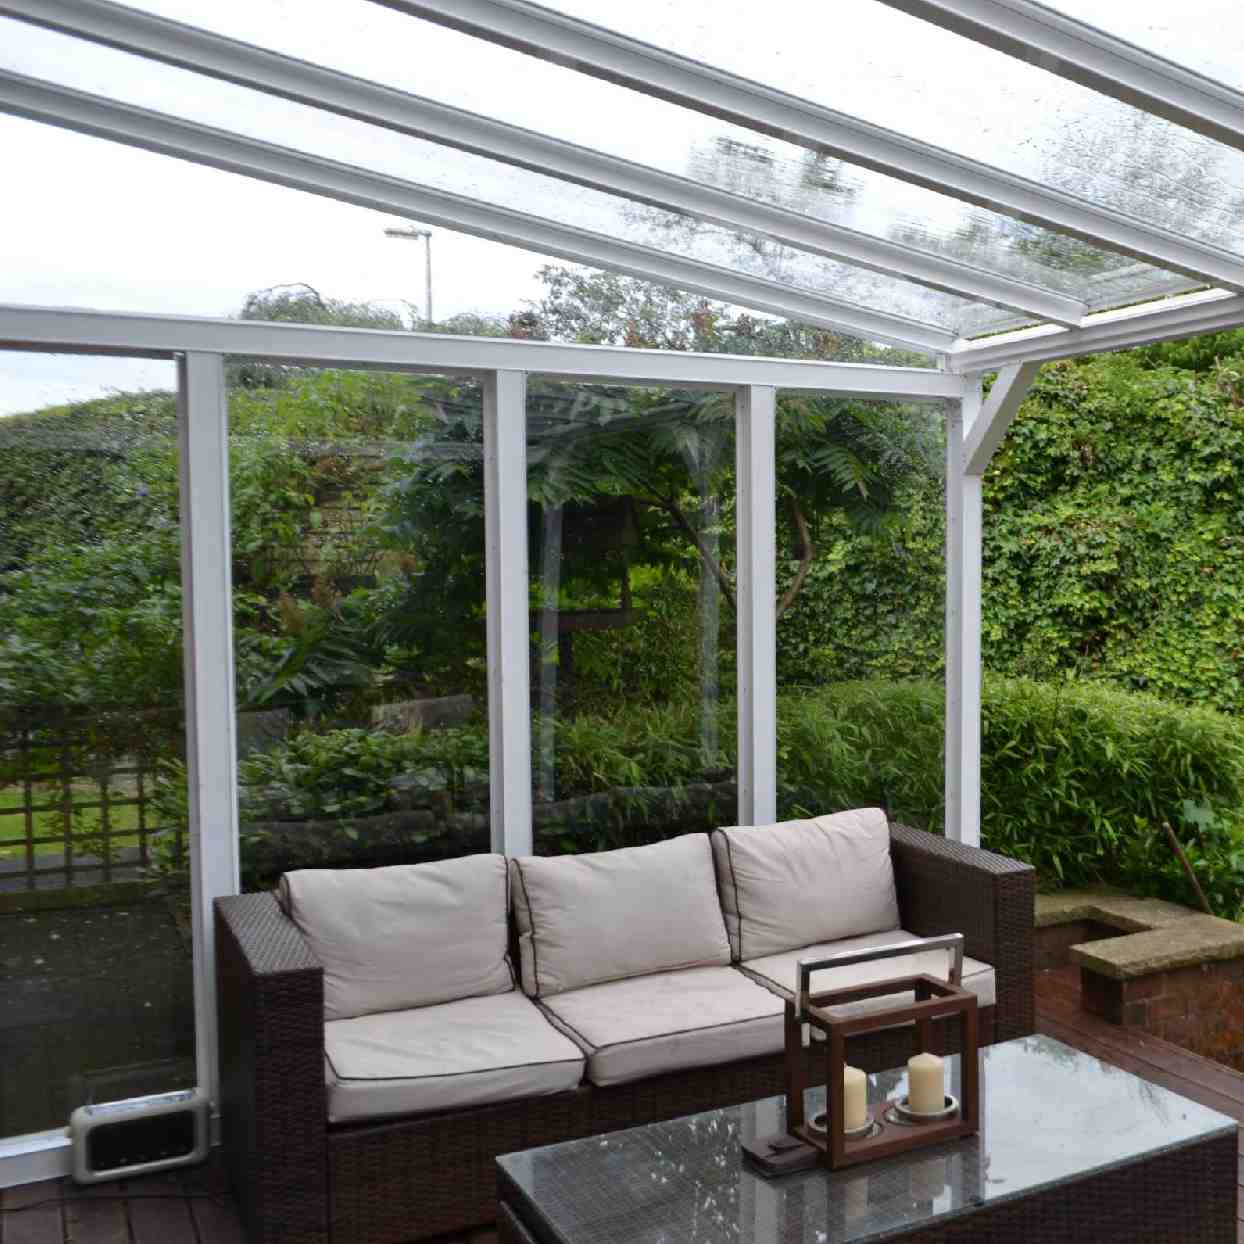 Buy Omega Verandah White with 16mm Polycarbonate Glazing - 7.4m (W) x 2.5m (P), (4) Supporting Posts online today